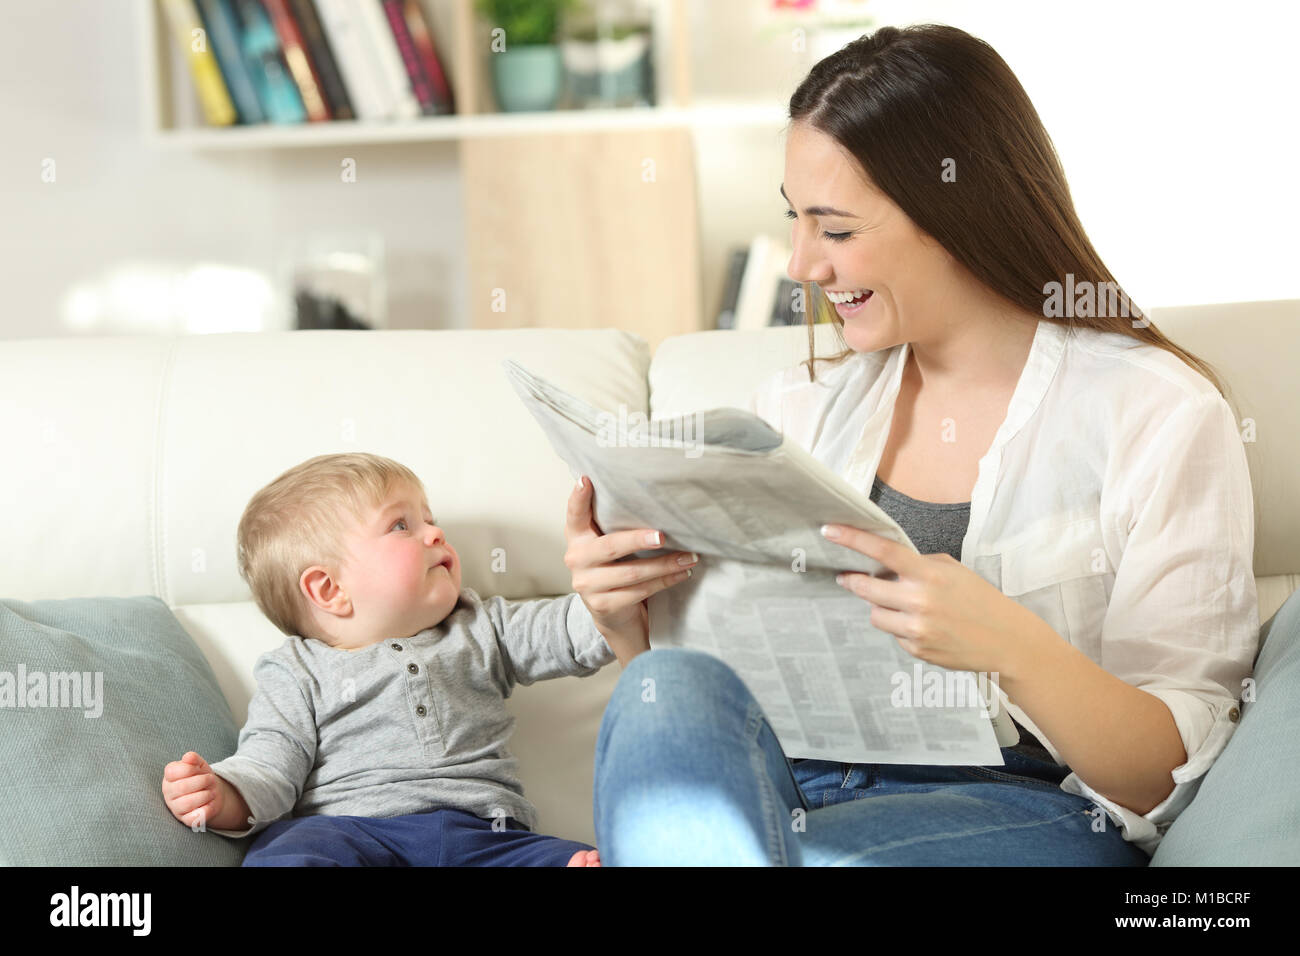 Baby demanding attention of his mother sitting on a couch in the living room at home Stock Photo